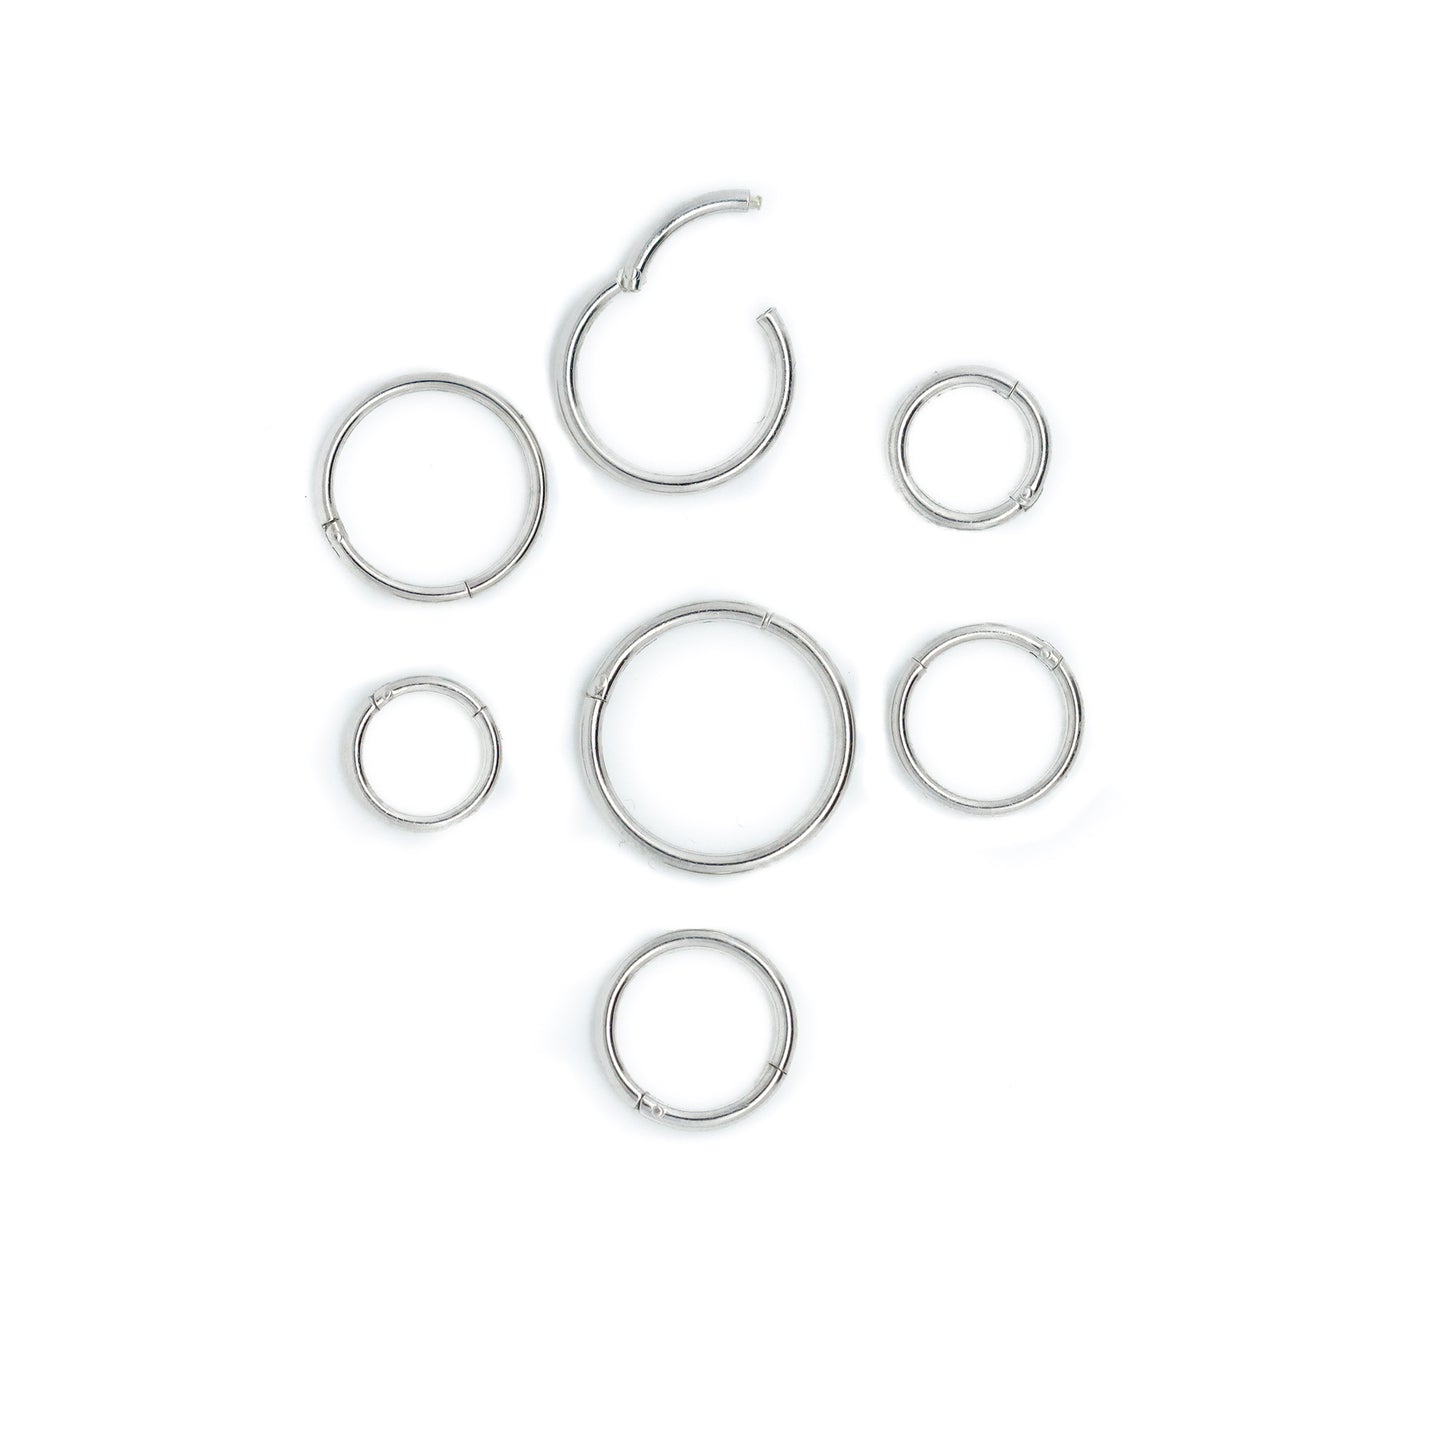 Solid 925 Silver | 16G/19G Hinge Hoop Segment Rings | Clicker Hoop | Septum | Cartilage | Tragus | Daith | Conch | 6mm 8mm 10mm - Sturdy South